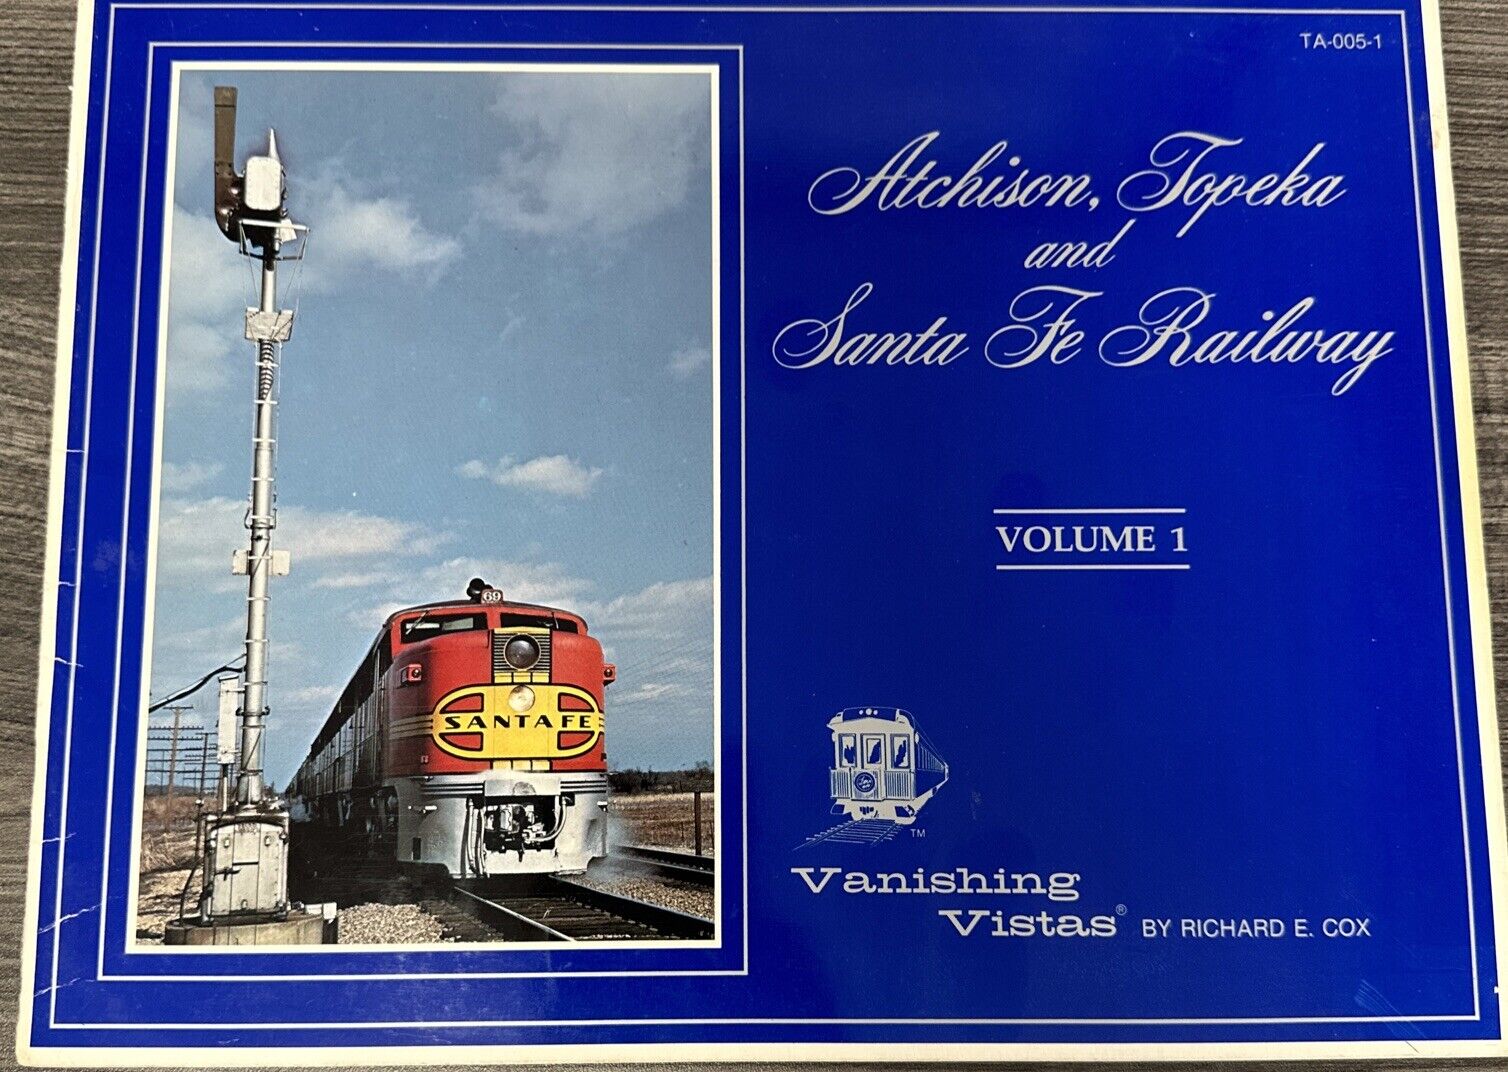 Atchison, Topeka and Santa Fe Railway Volume 1 by Richard E. Cox SC Used